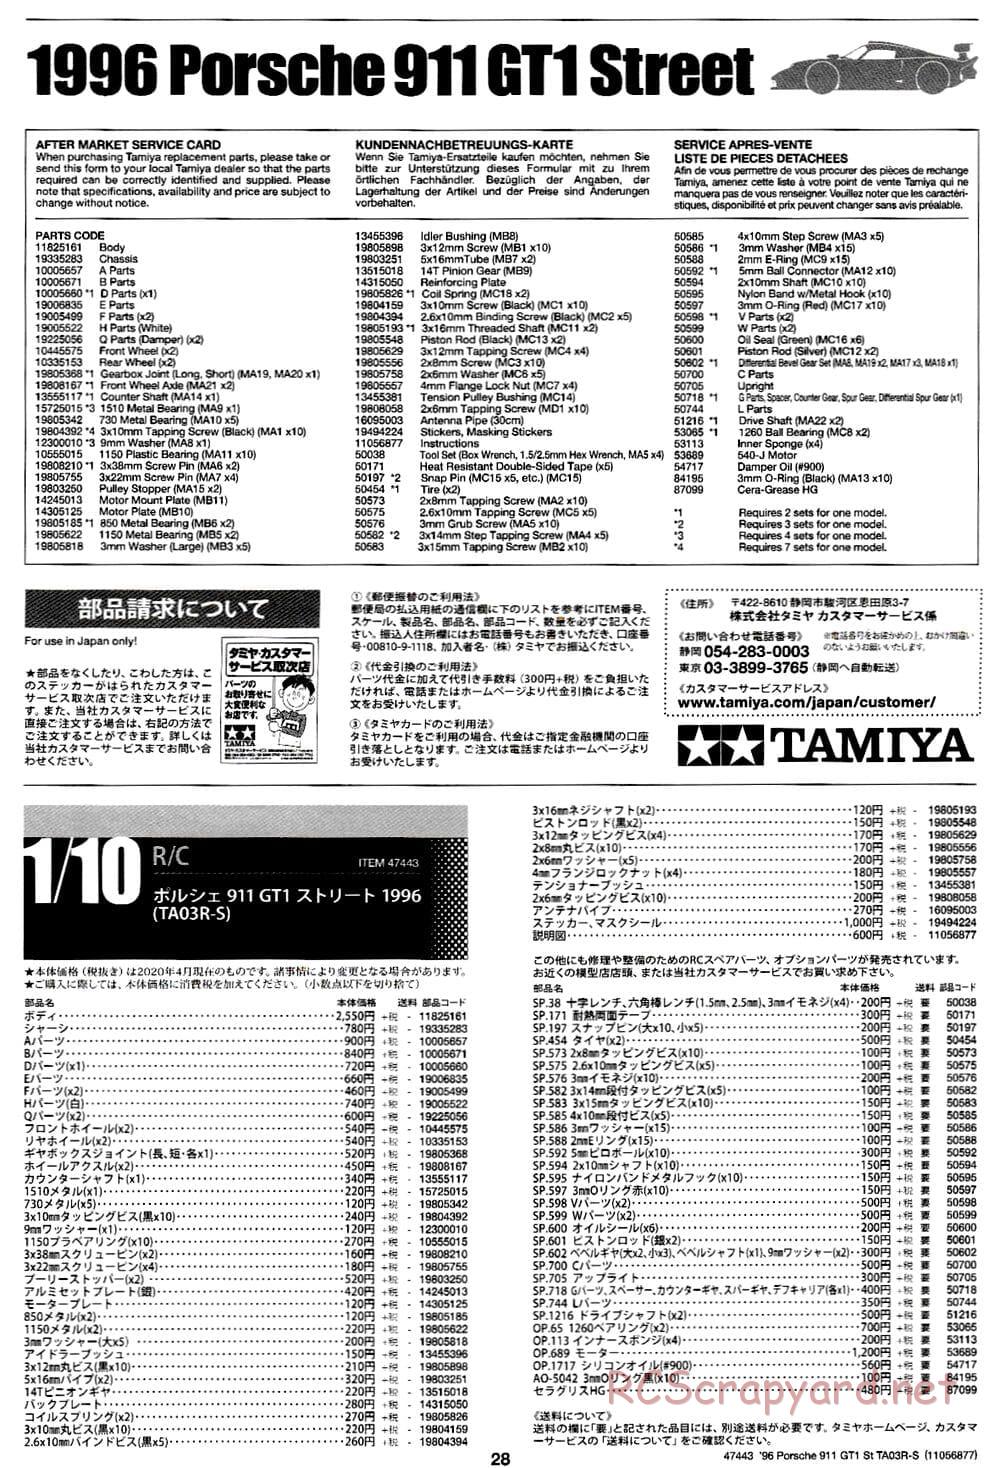 Tamiya - Porsche 911 GT1 Street - TA-03RS Chassis - Manual - Page 28